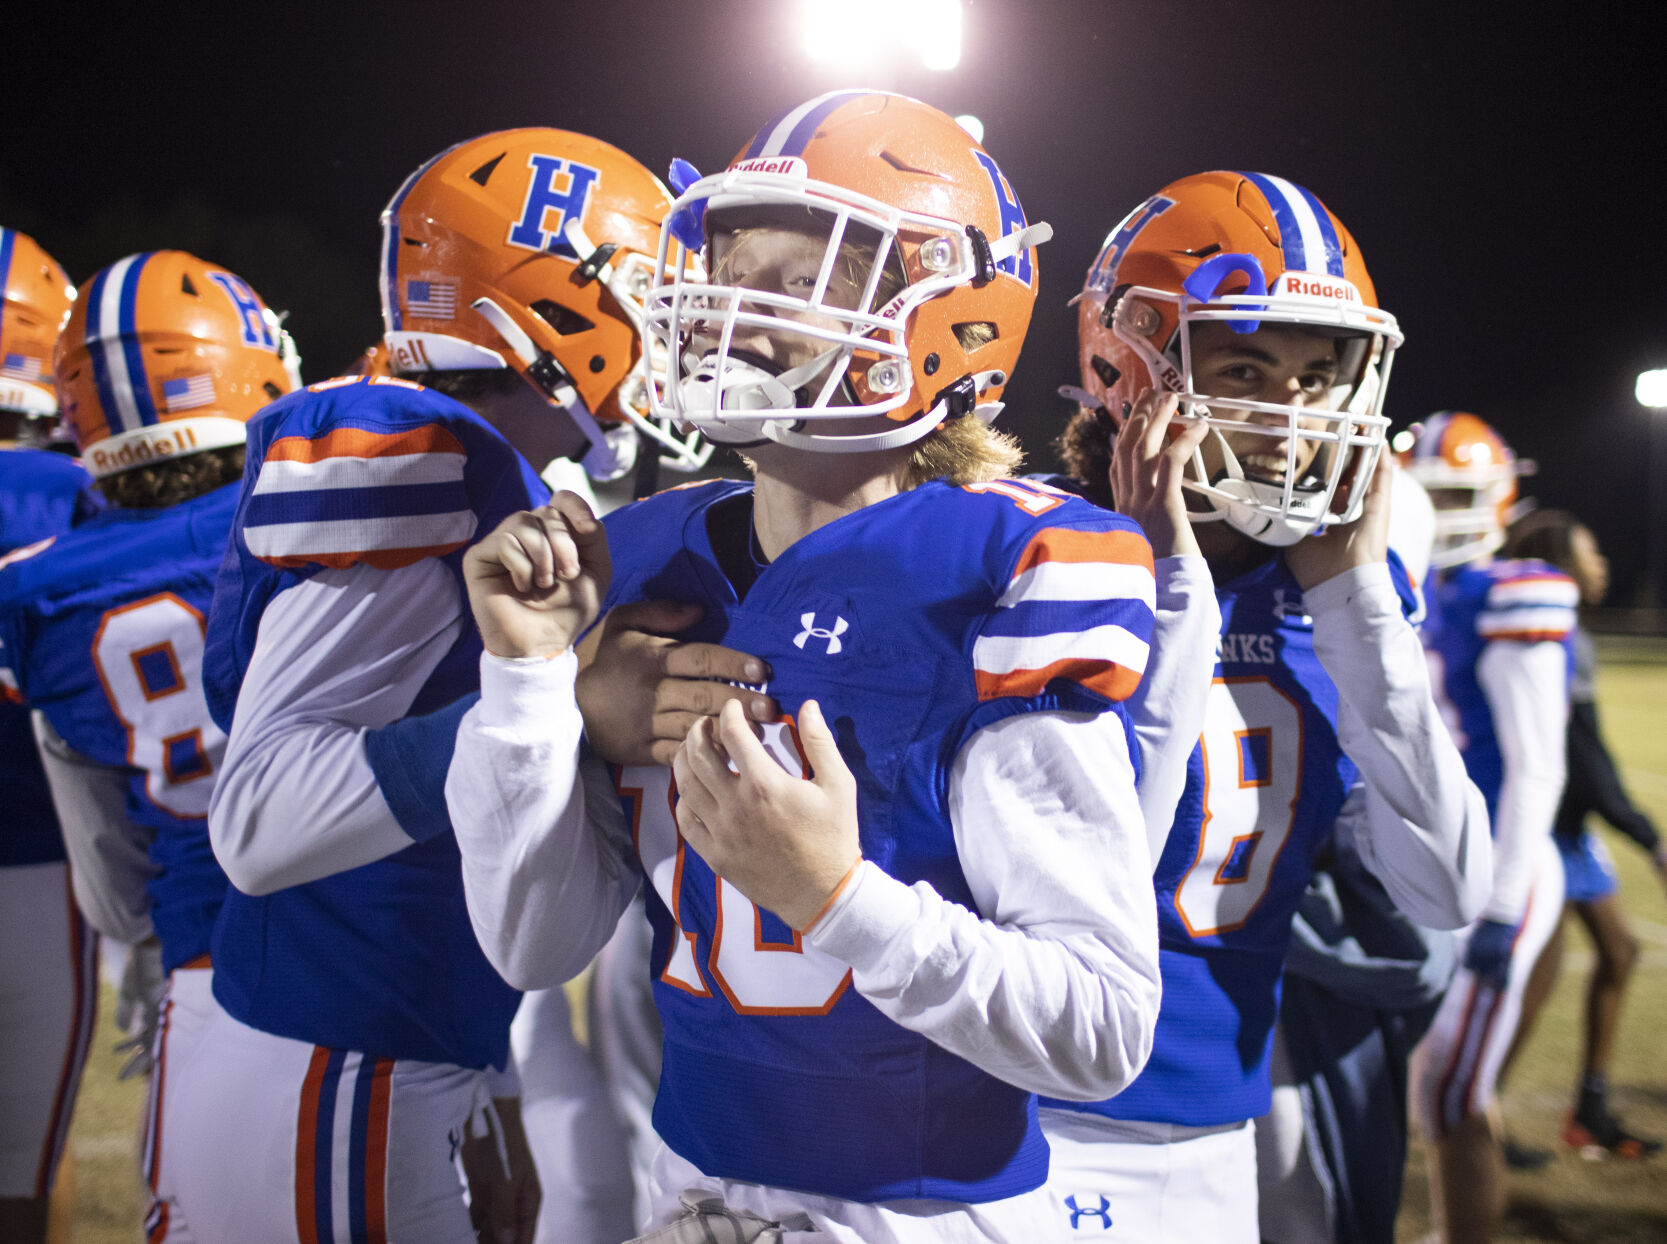 Kevon Rivera rushes for 264 yards and scores 5 touchdowns in Hanahan’s playoff victory over Aynor